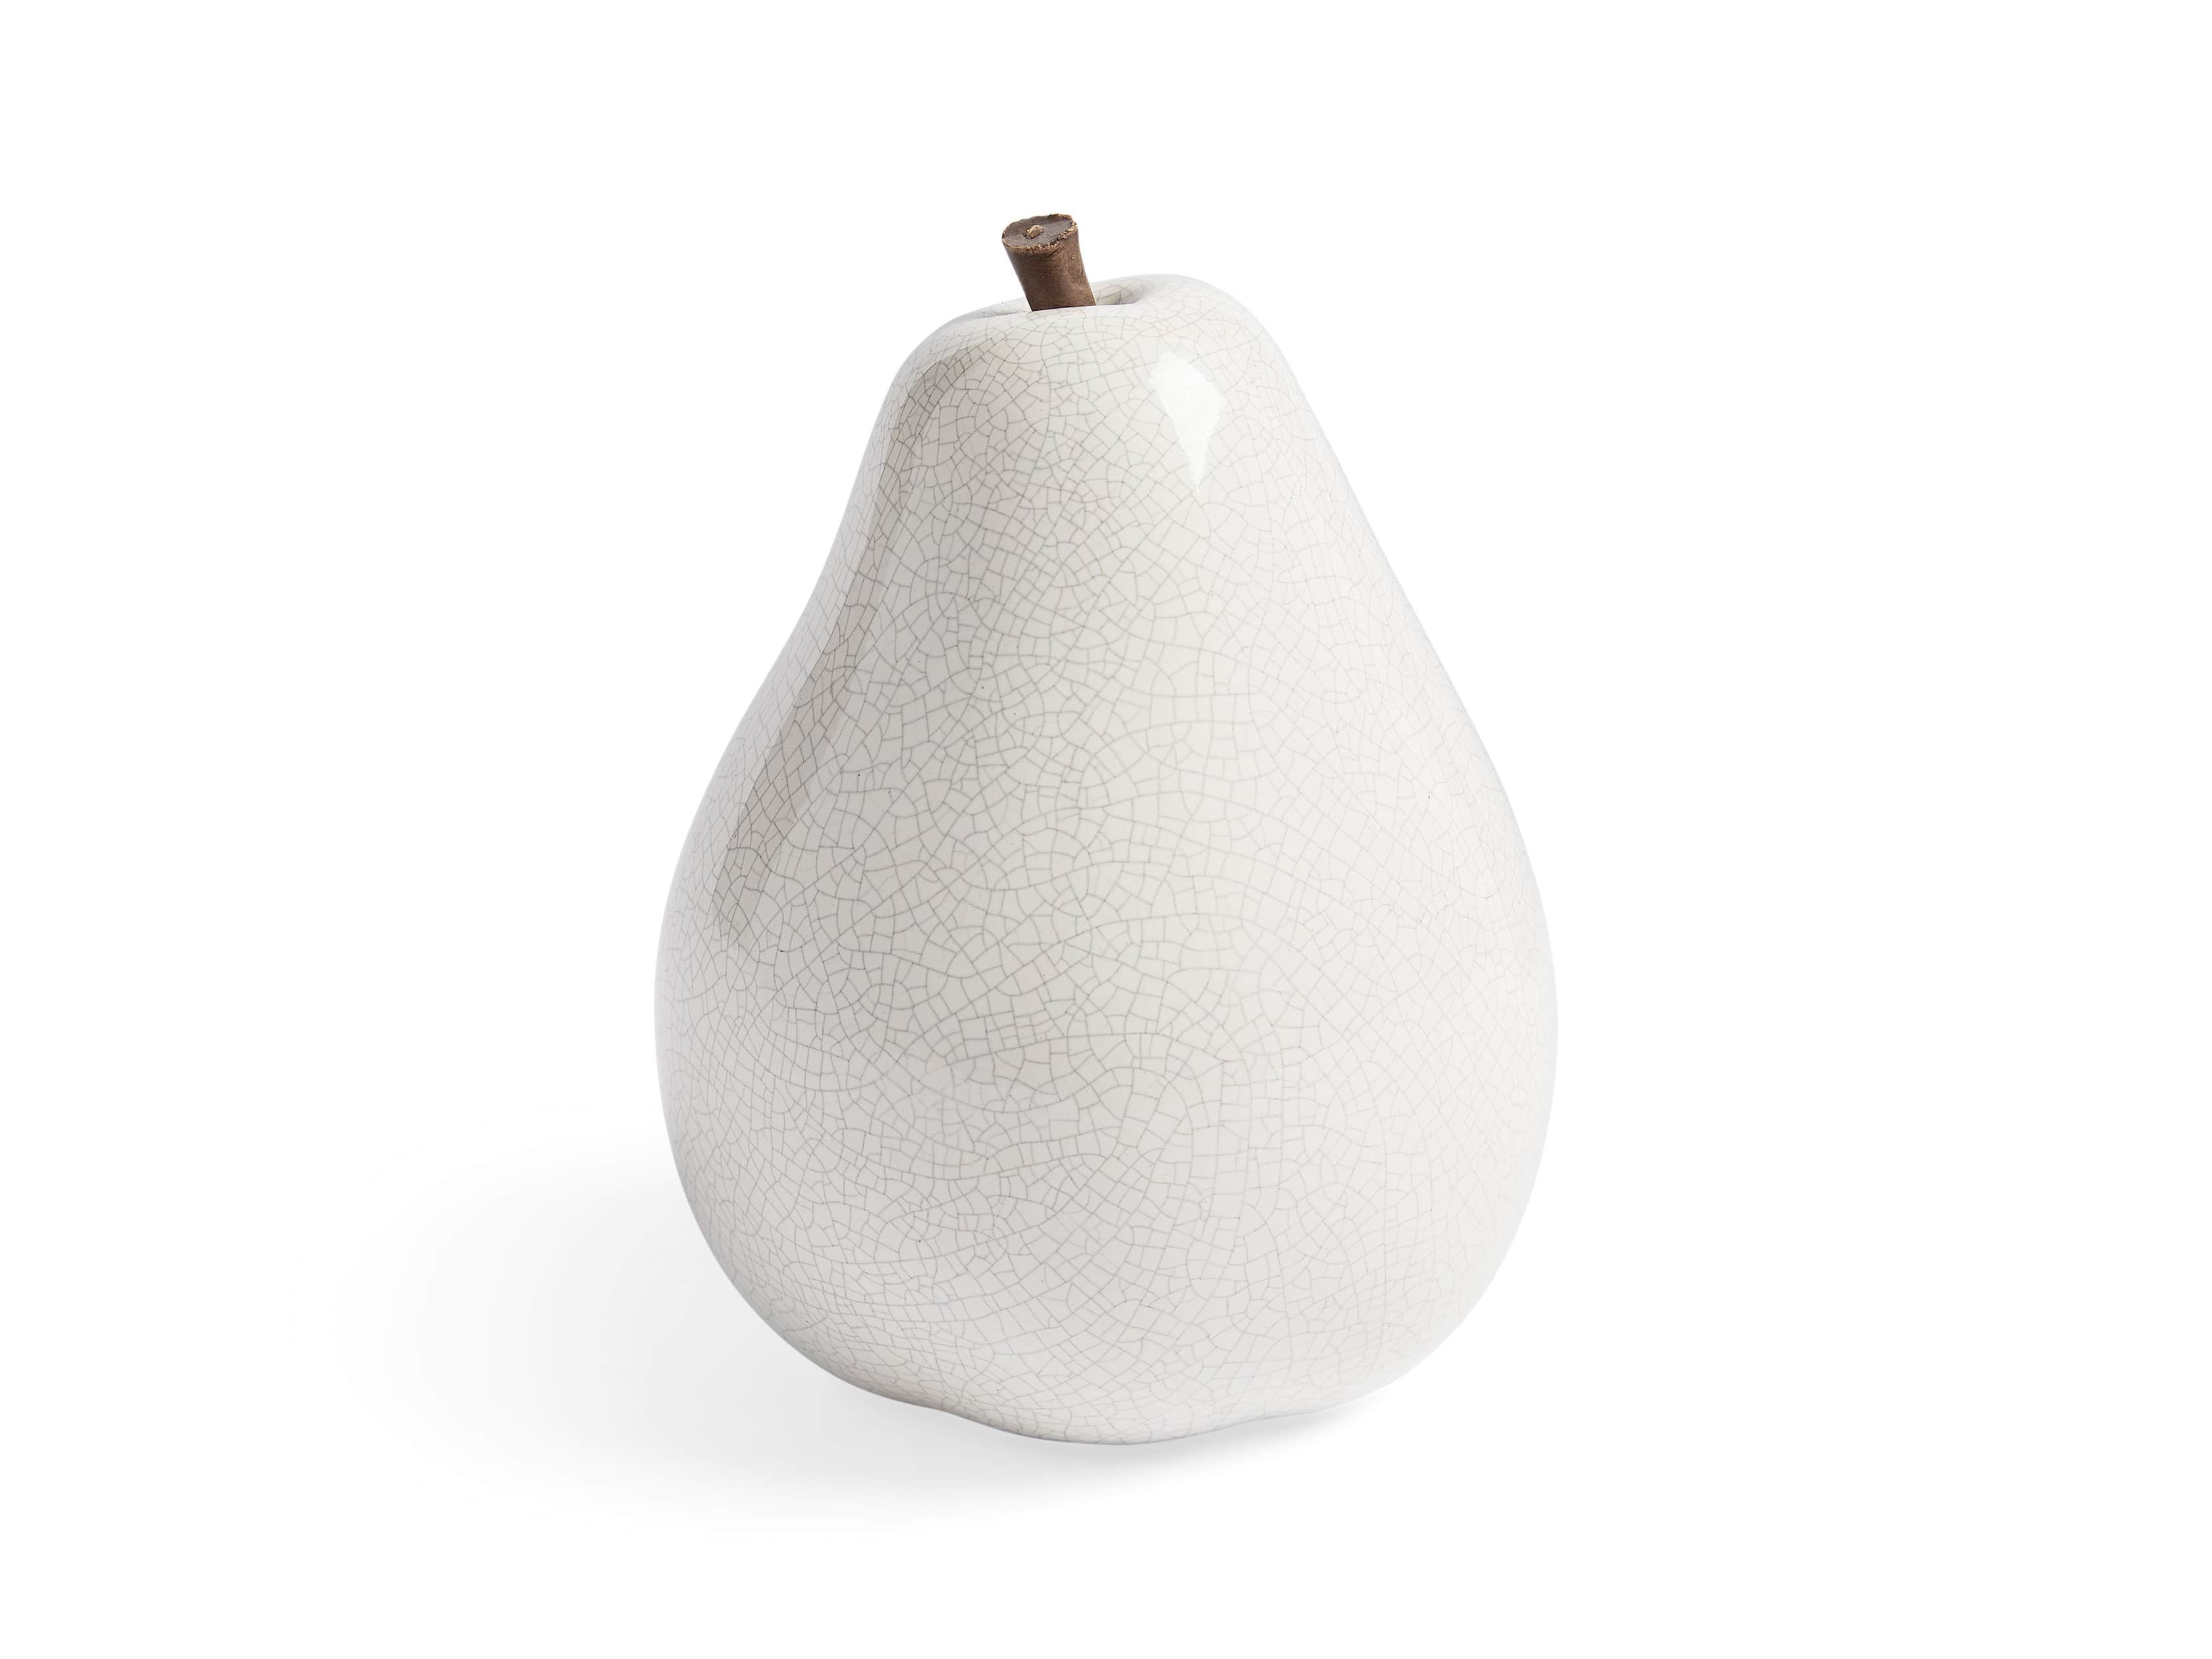 Ceramic Pear in White - Come take a peek at more Arhaus French Vintage Timeless Furniture, Decor and Lighting on Hello Lovely Studio.